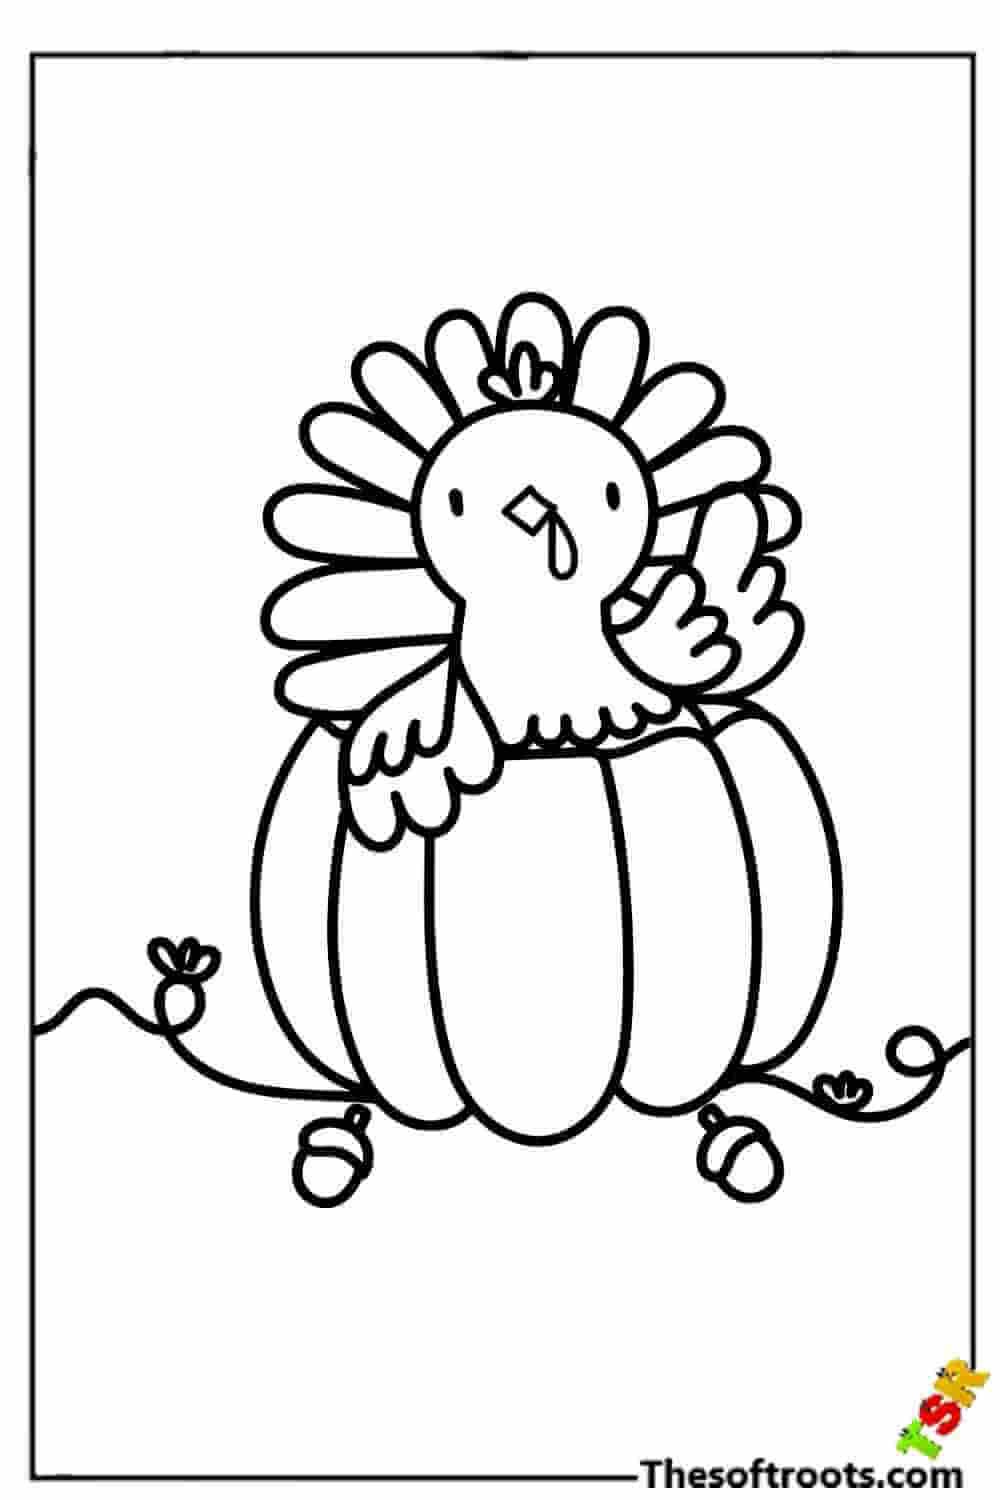 Thanksgiving dinner pumpkin coloring pages